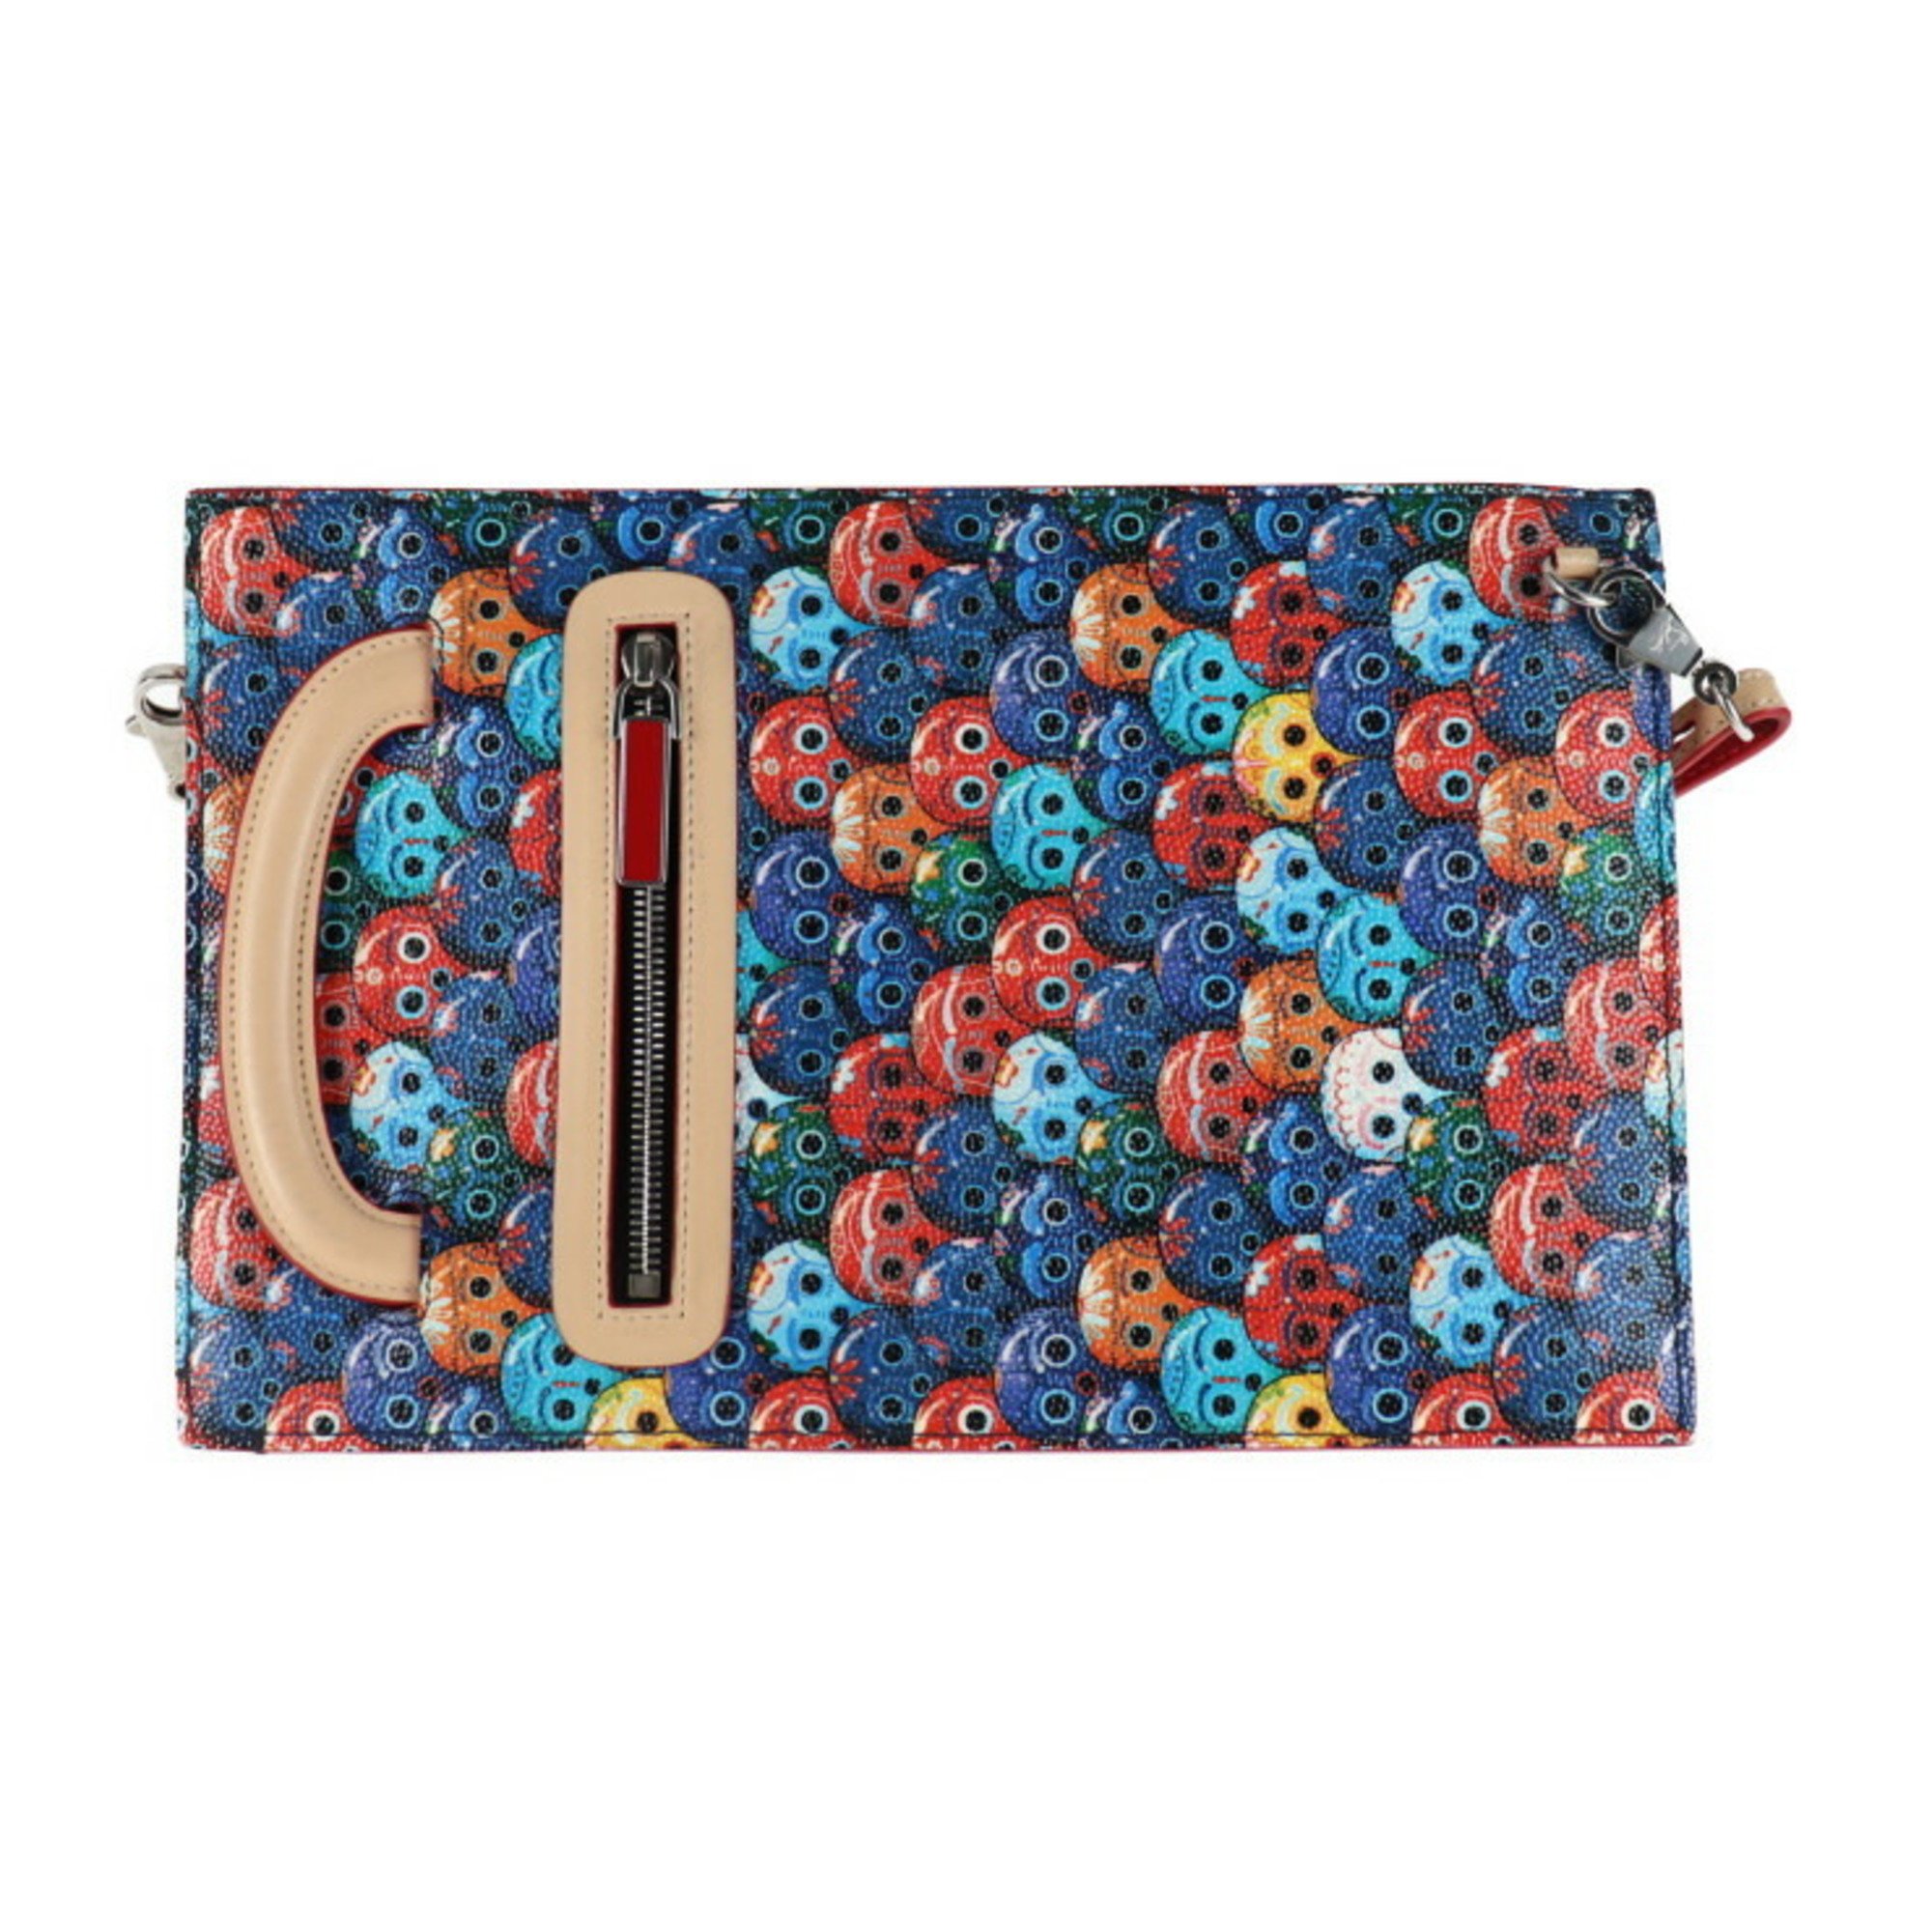 Christian Louboutin Trick Track Small Portfolio Clutch Bag 3175108 Leather Multicolor Skull 3WAY 2WAY Shoulder